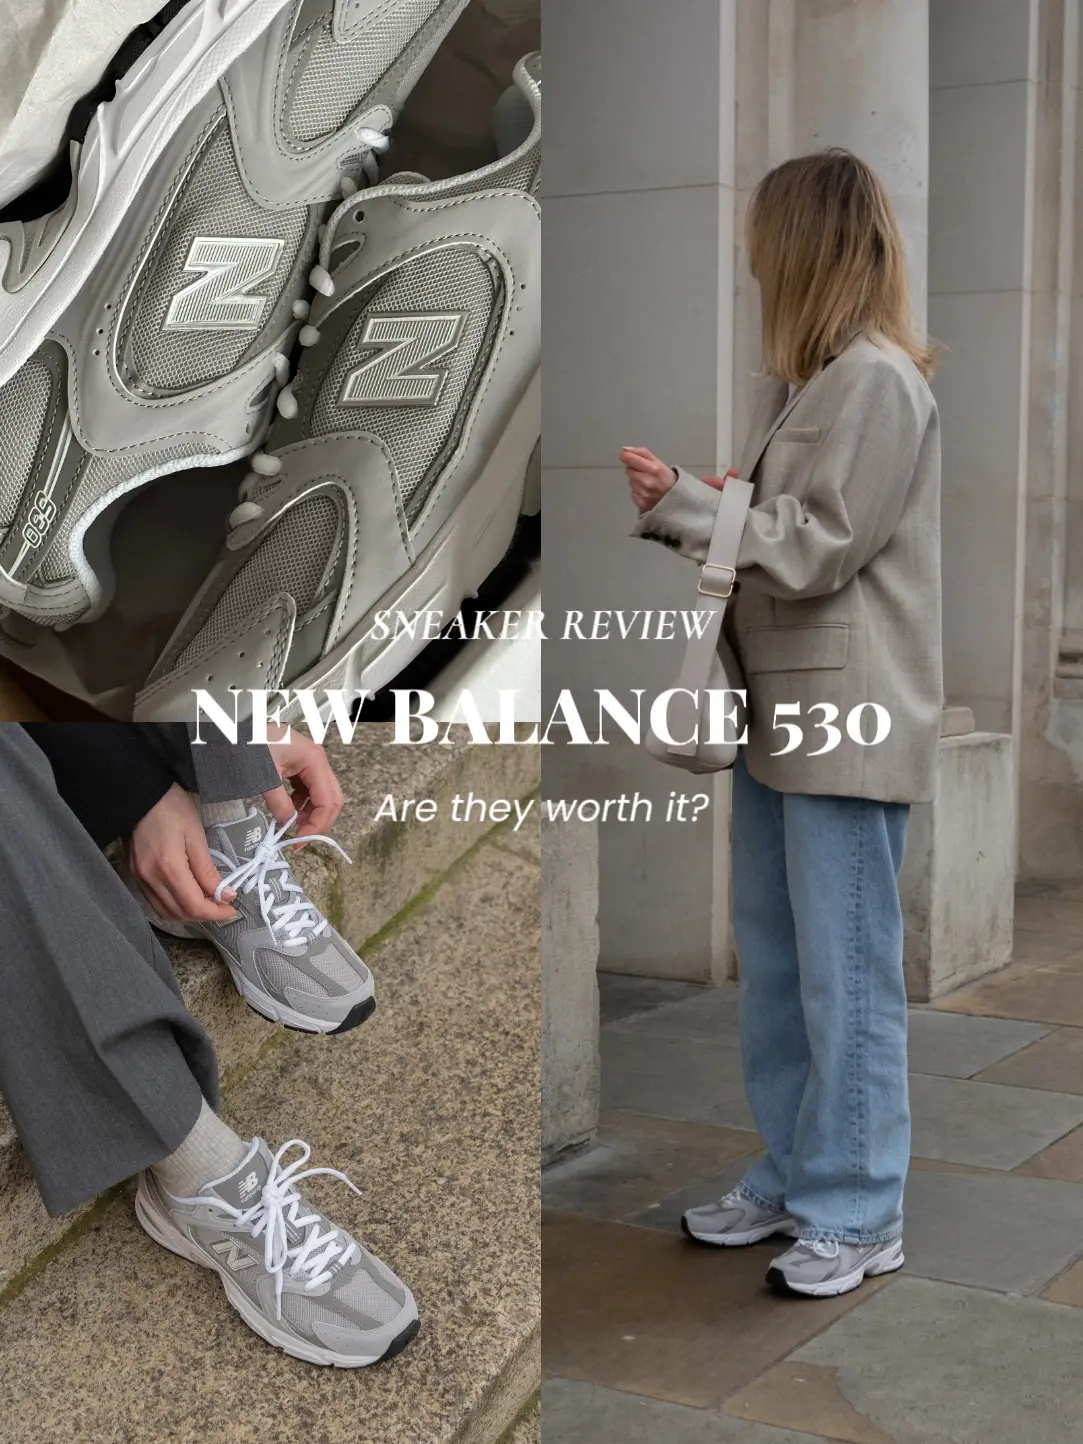 19 top Ways to Style My New Balance 530 ideas in 2024